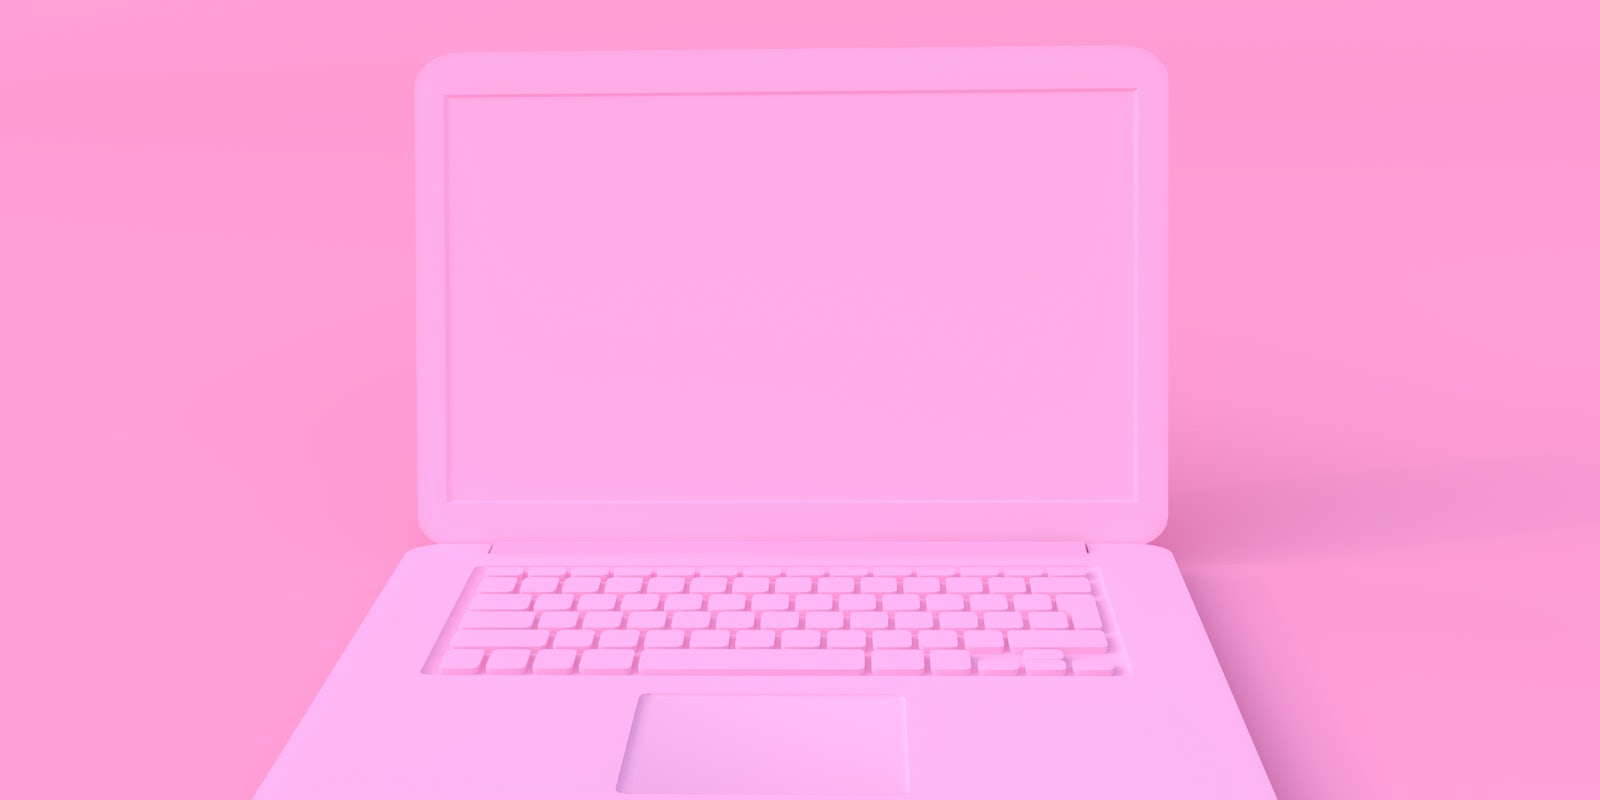 a pink latop on a pink background with pink keys and a pink screen